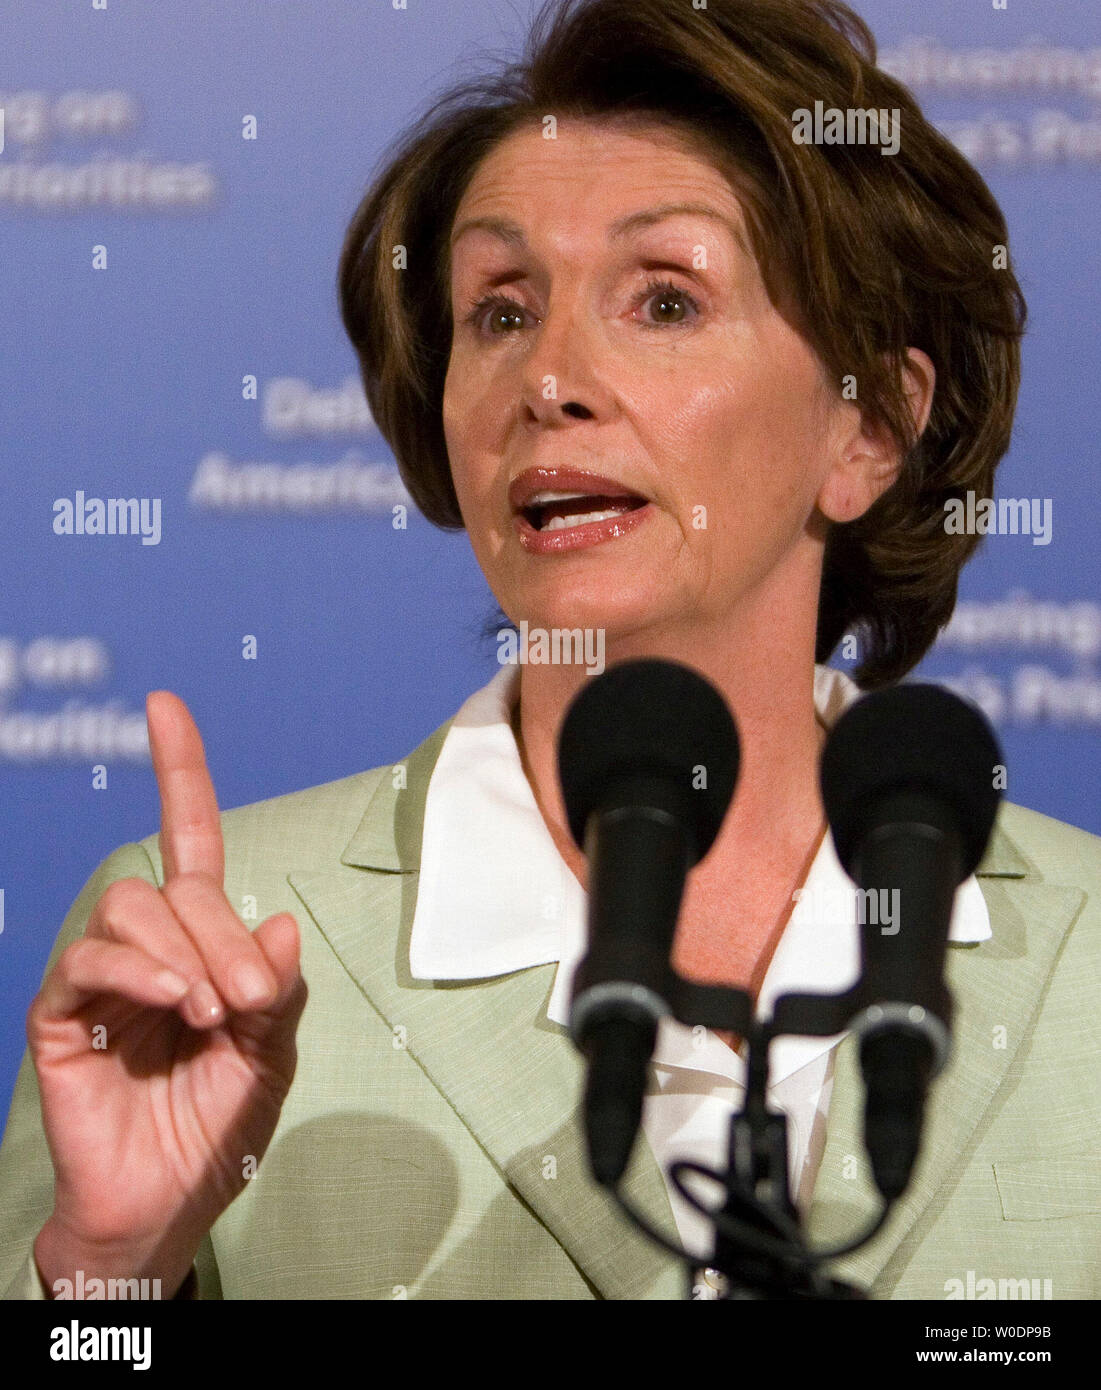 Speaker of the House Nancy Pelosi (D-CA) discusses the legislative accomplishments of and obstacles to the new Democratic Congress over the past six months on Capitol Hill in Washington on June 29, 2007.     (UPI Photo/David Brody) Stock Photo